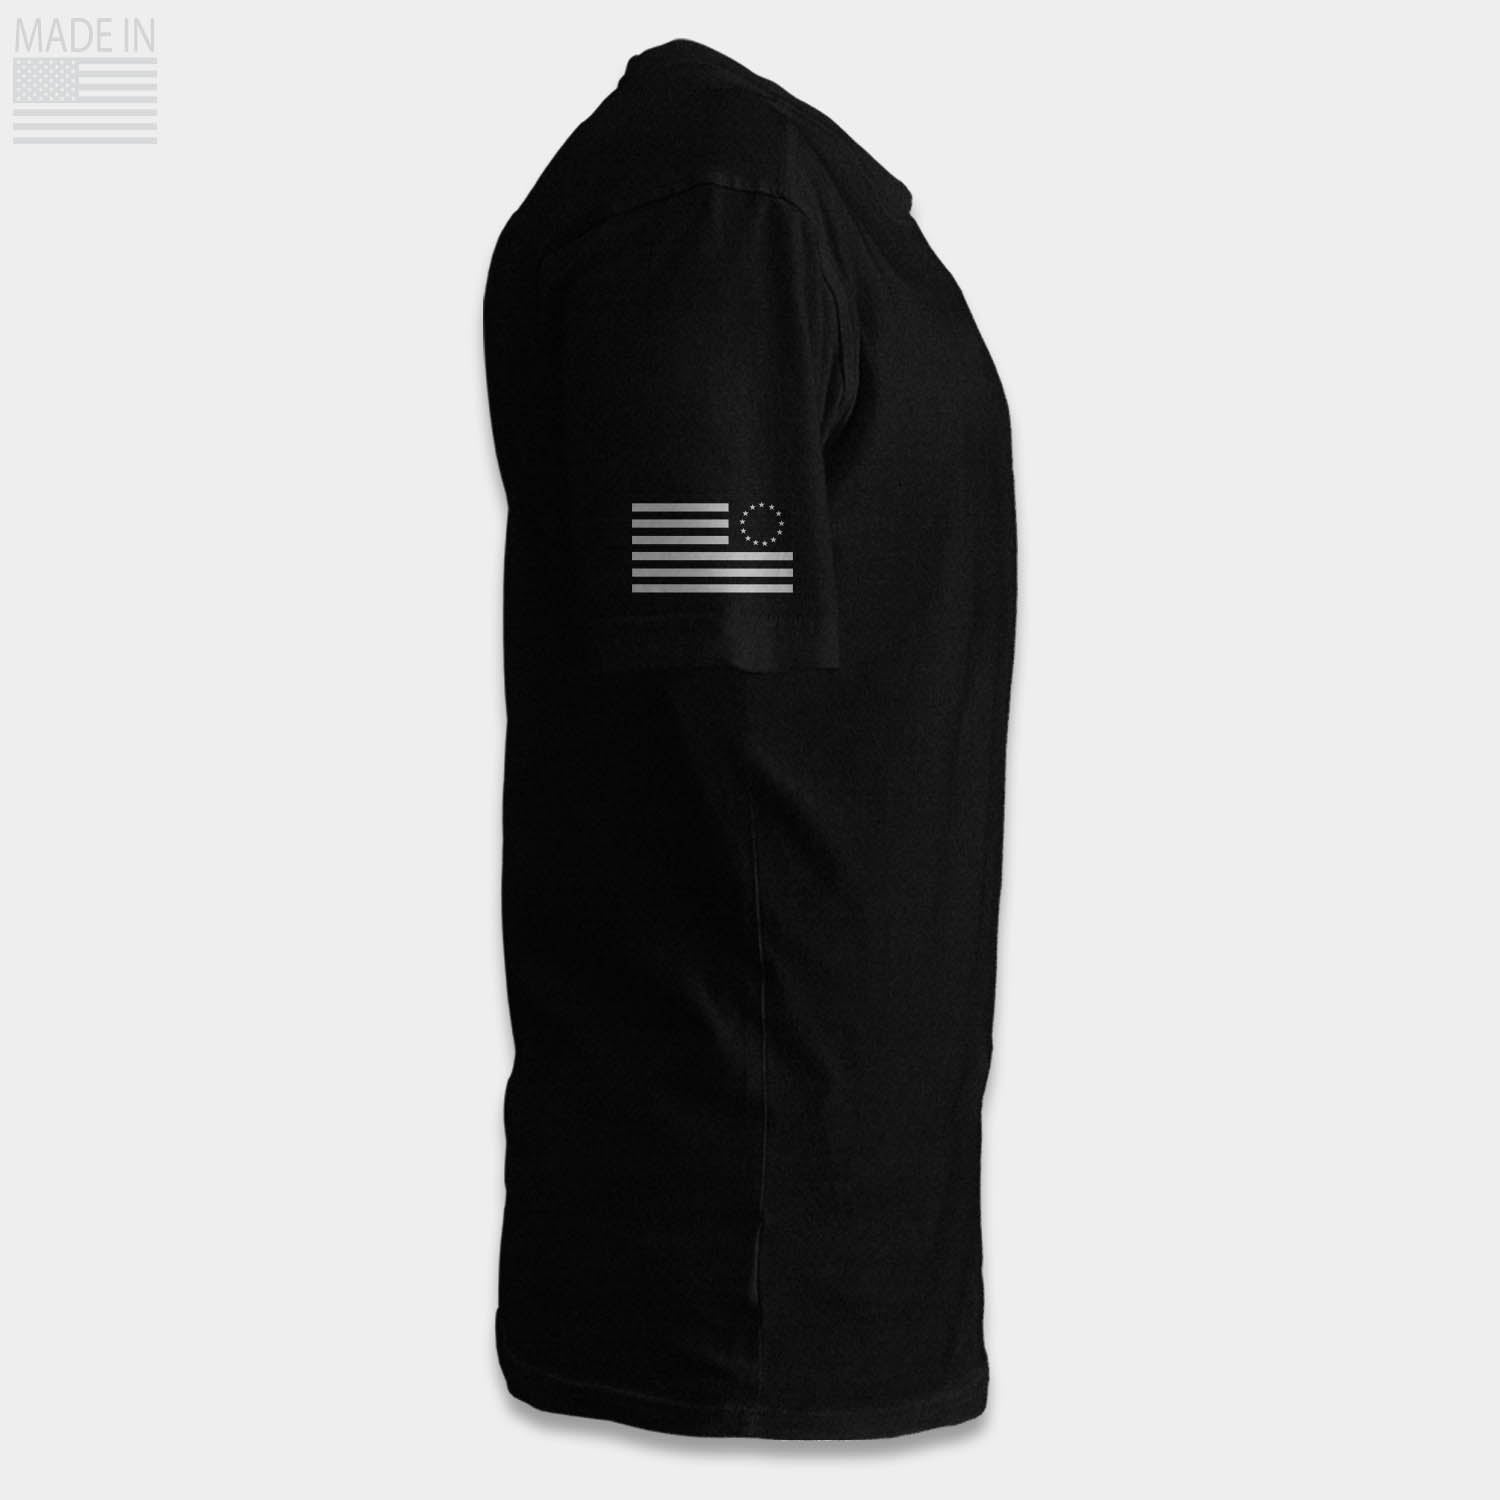 Betsy Ross flag is found on the right sleeve of our patriotic USA Made shirts